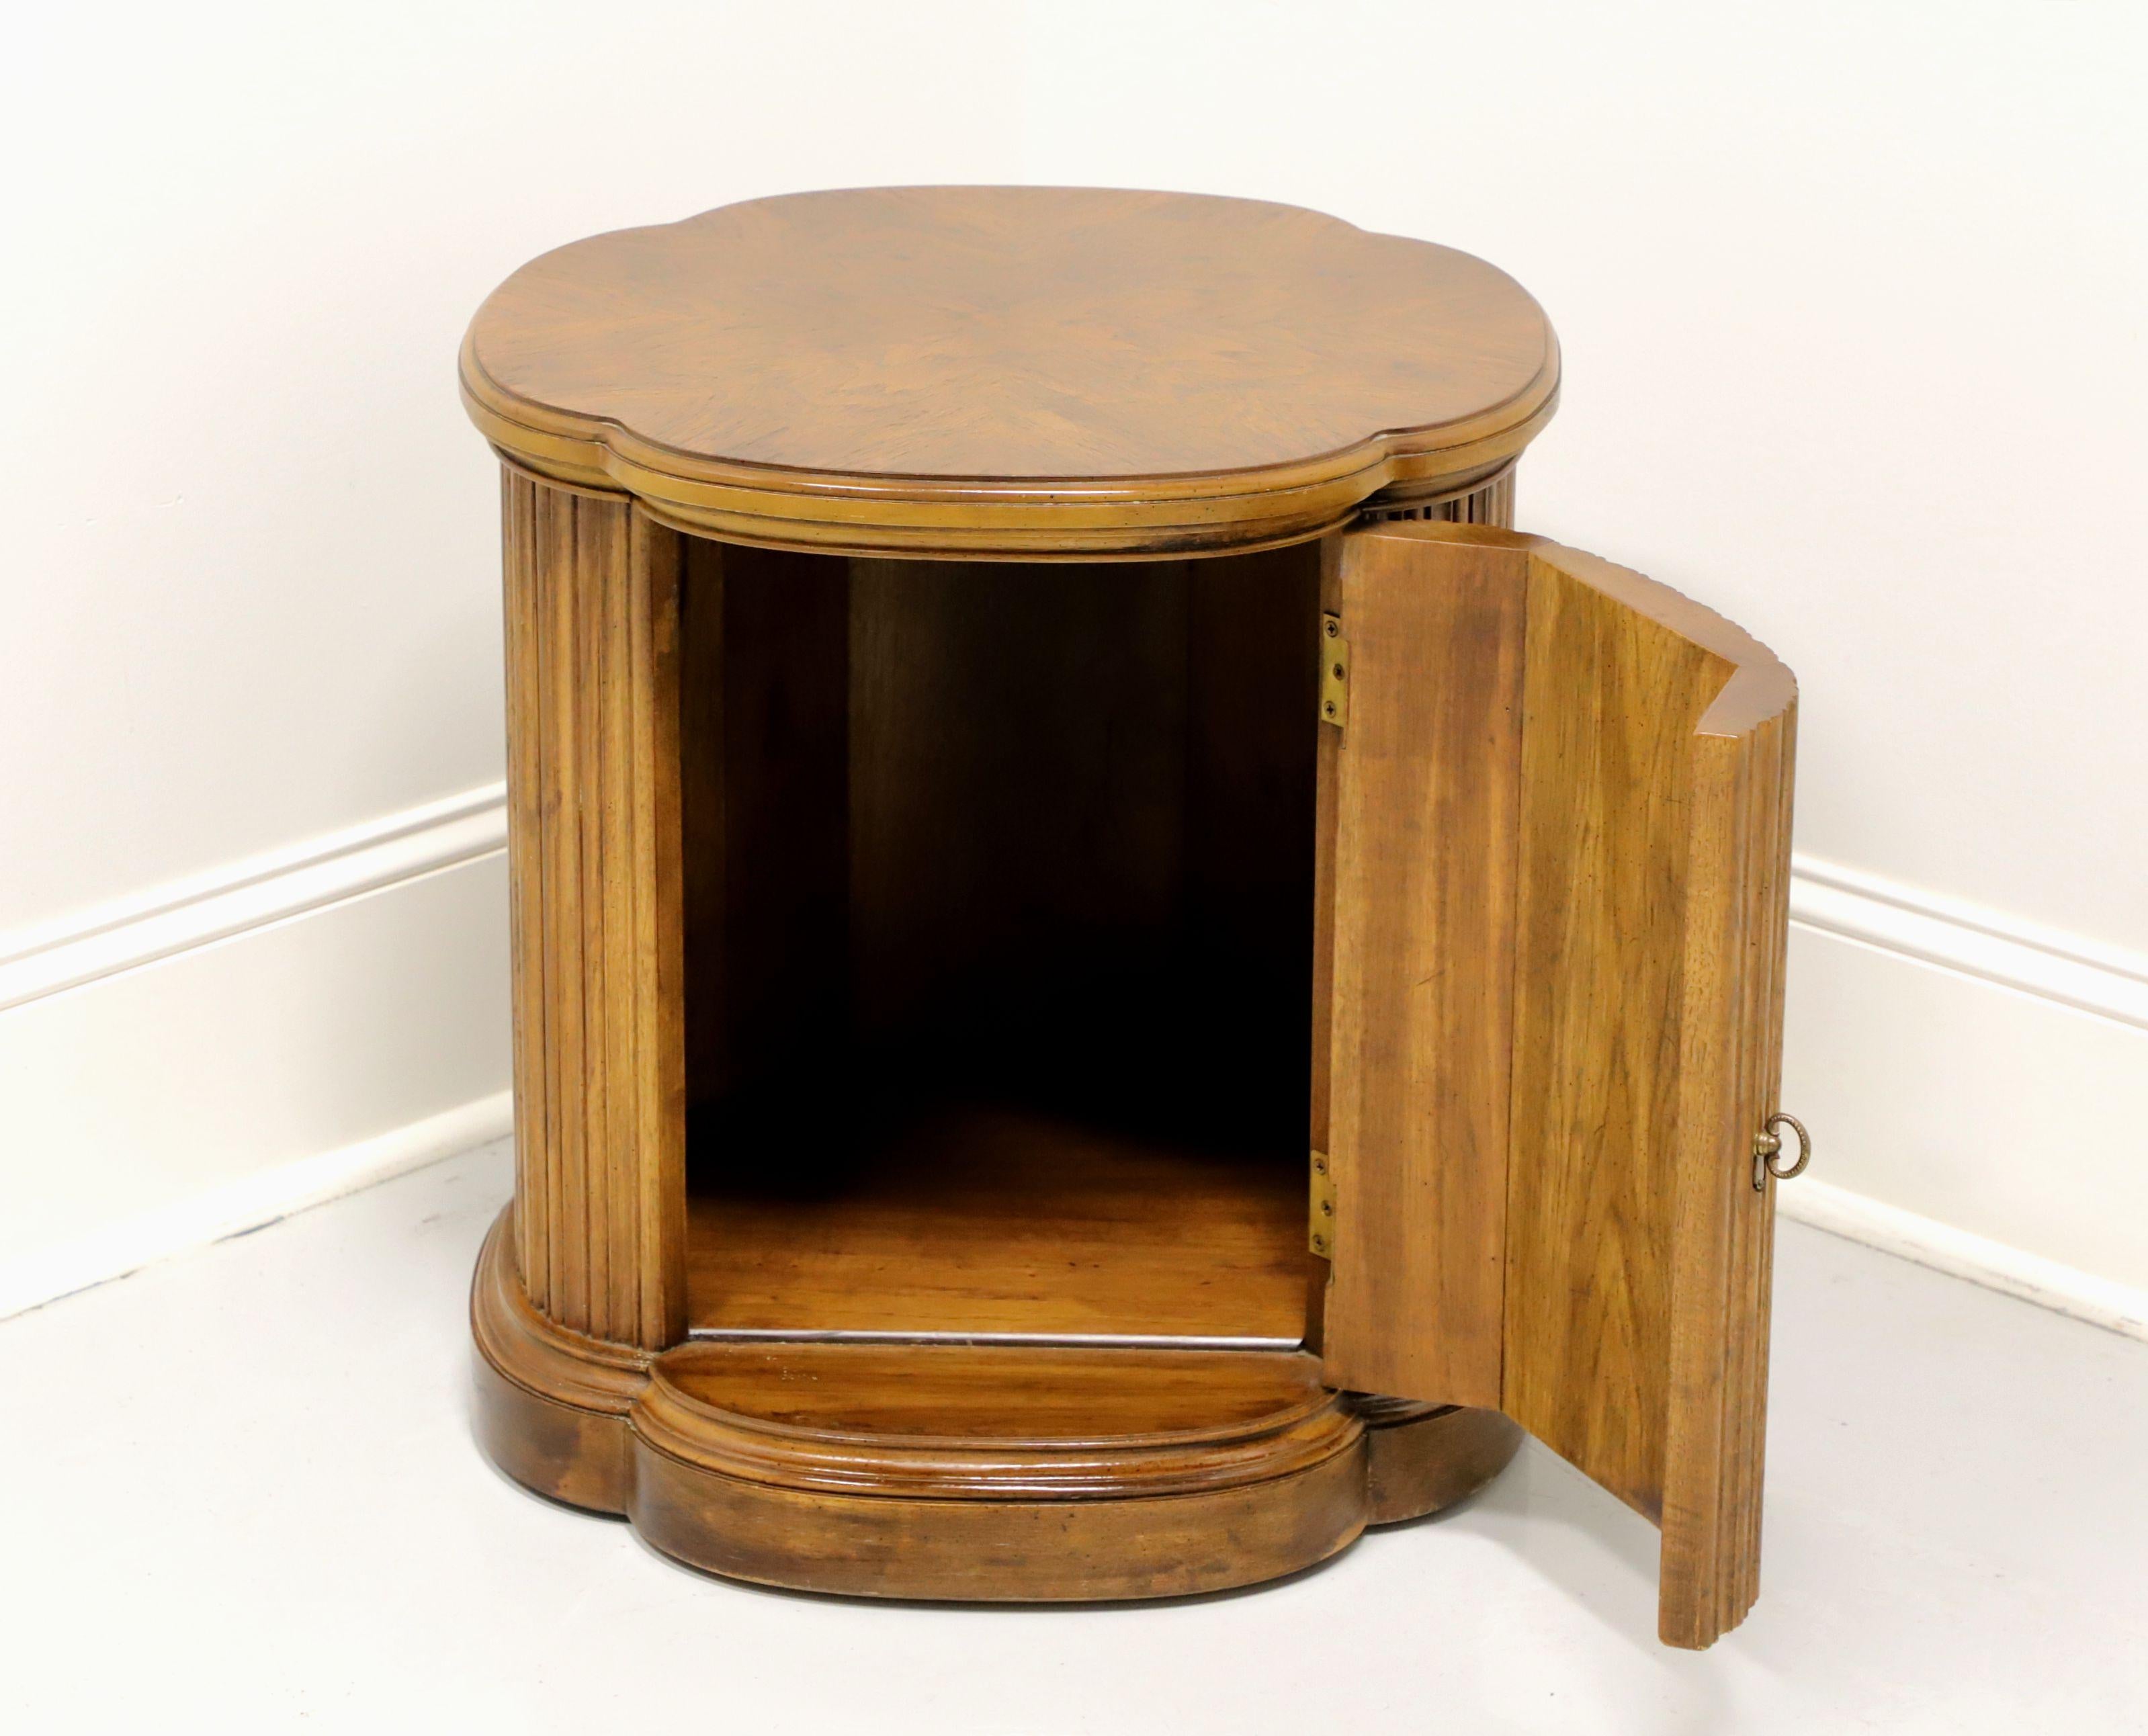 American Burl Walnut Clover Shaped Cabinet Accent Table by HENREDON